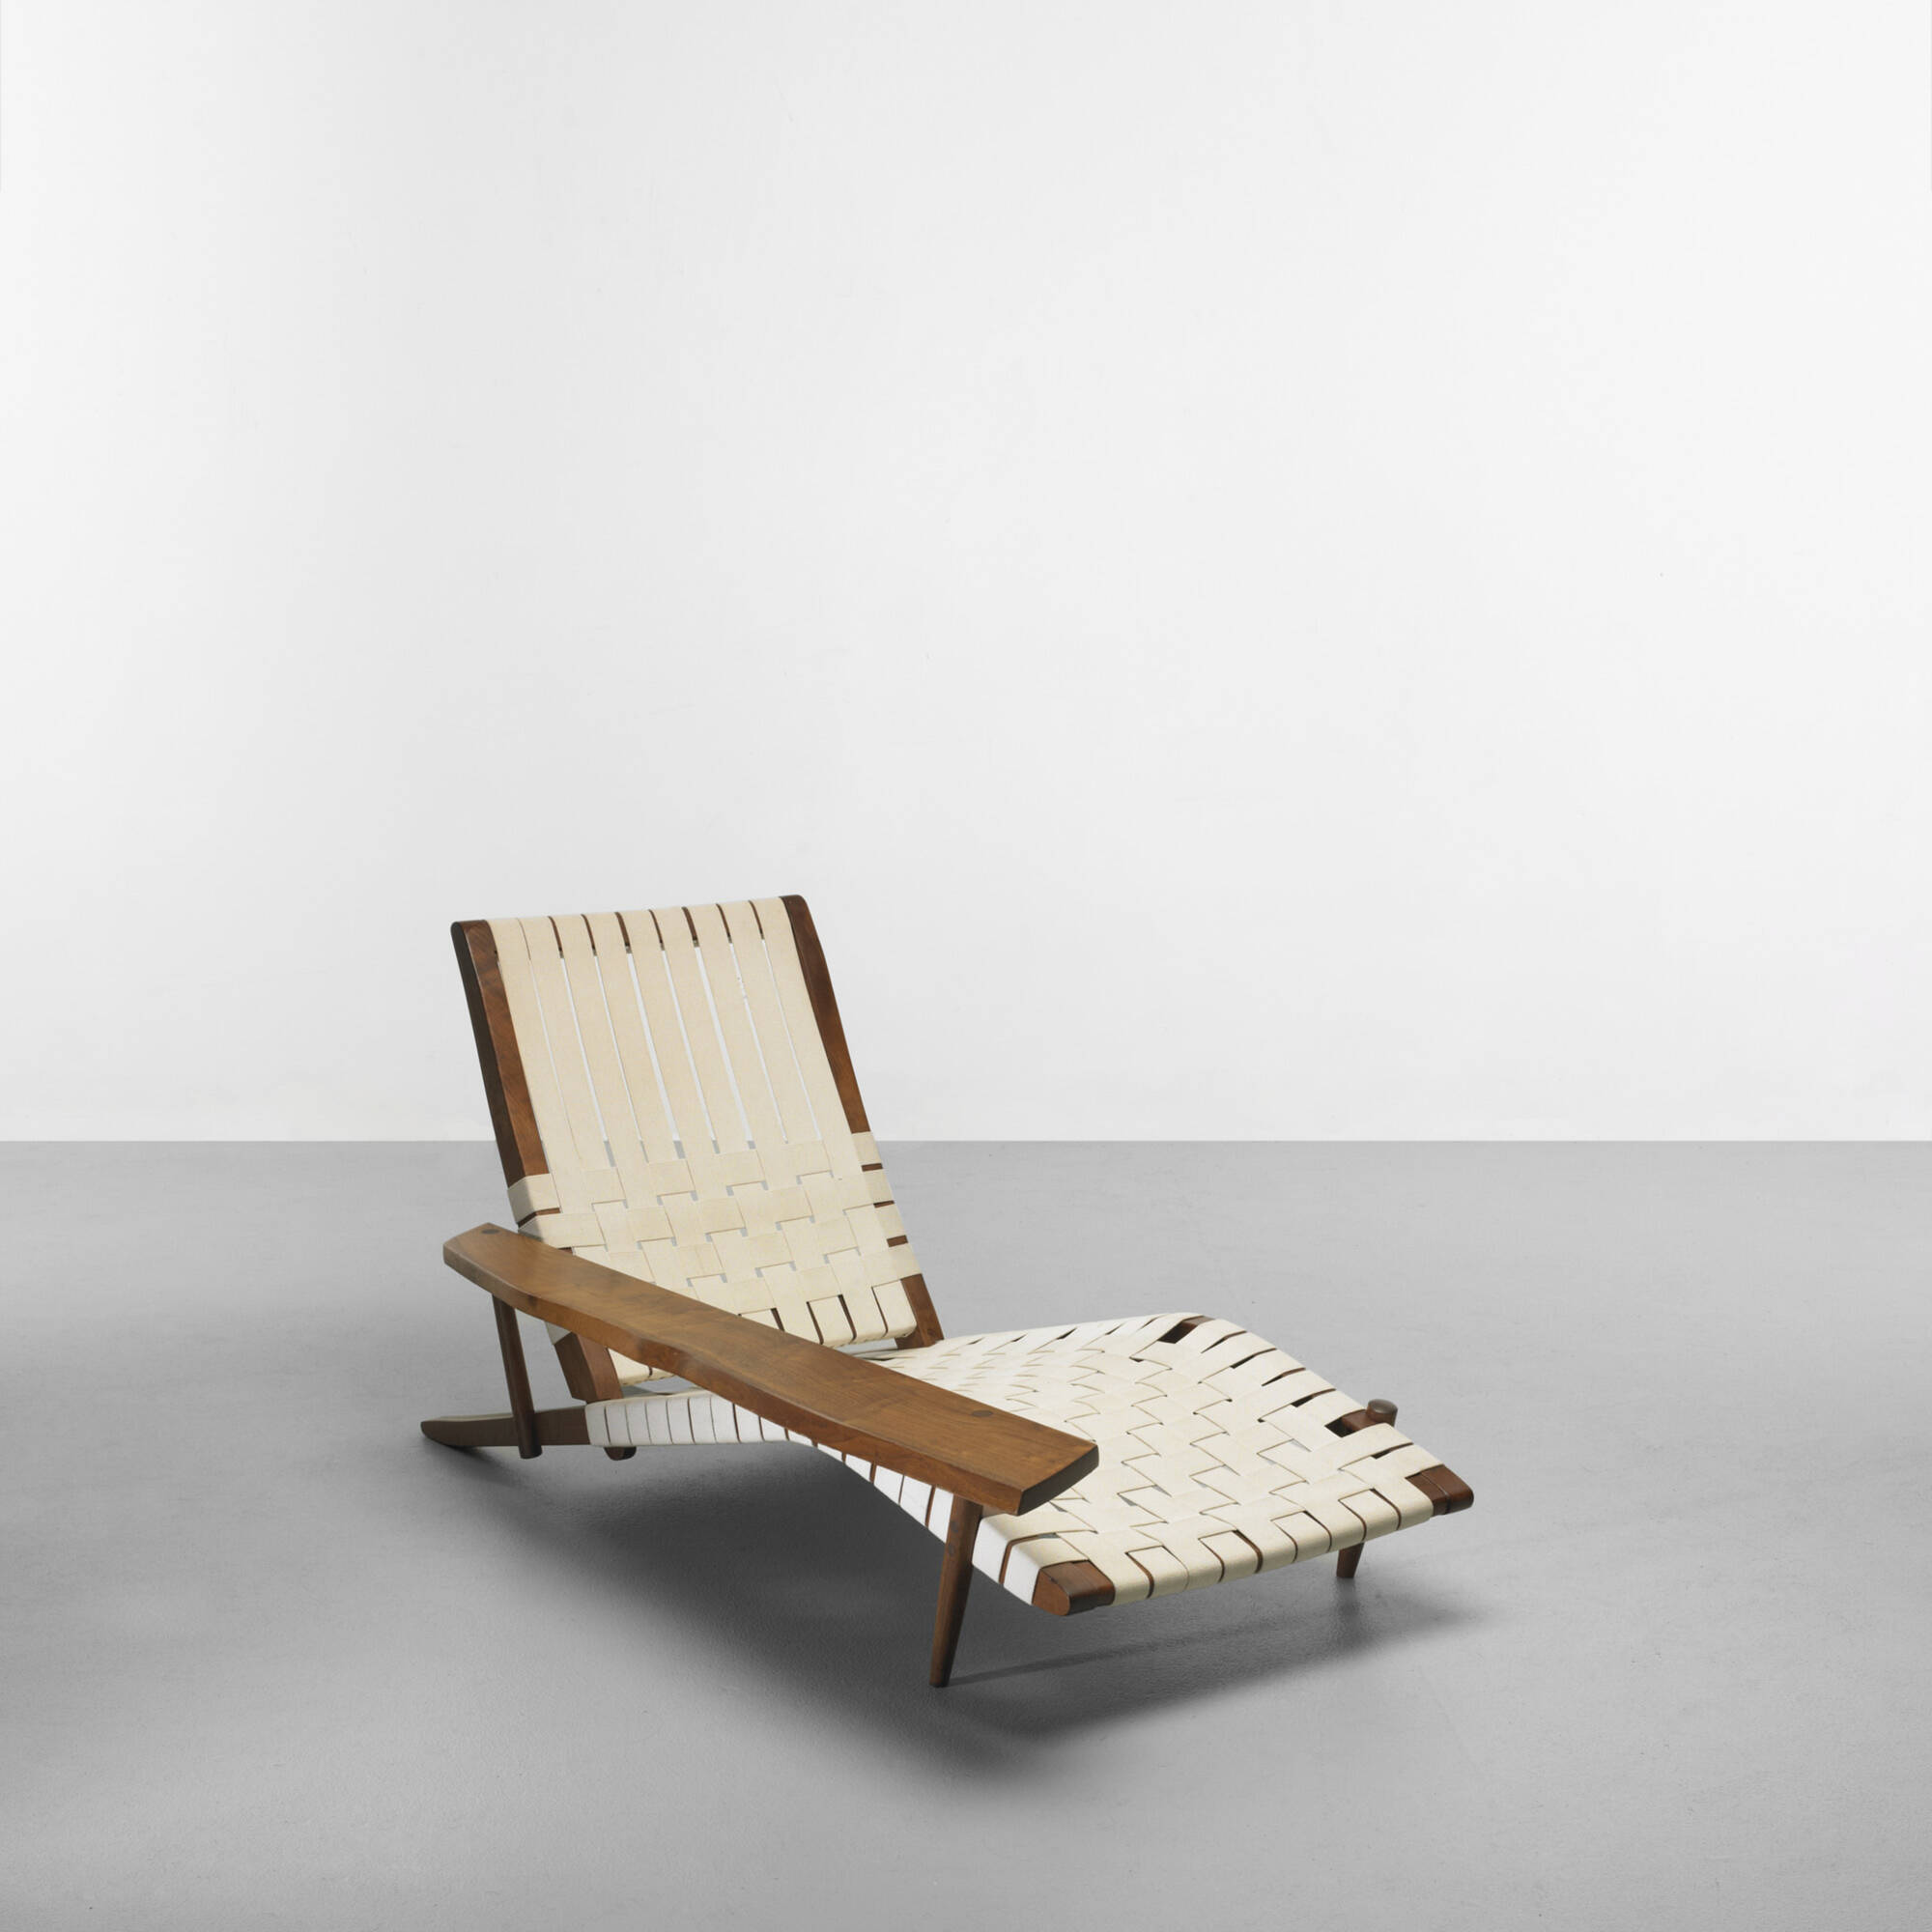 138: GEORGE NAKASHIMA, chair < Important Design, 15 December < Auctions | Wright: of and Design